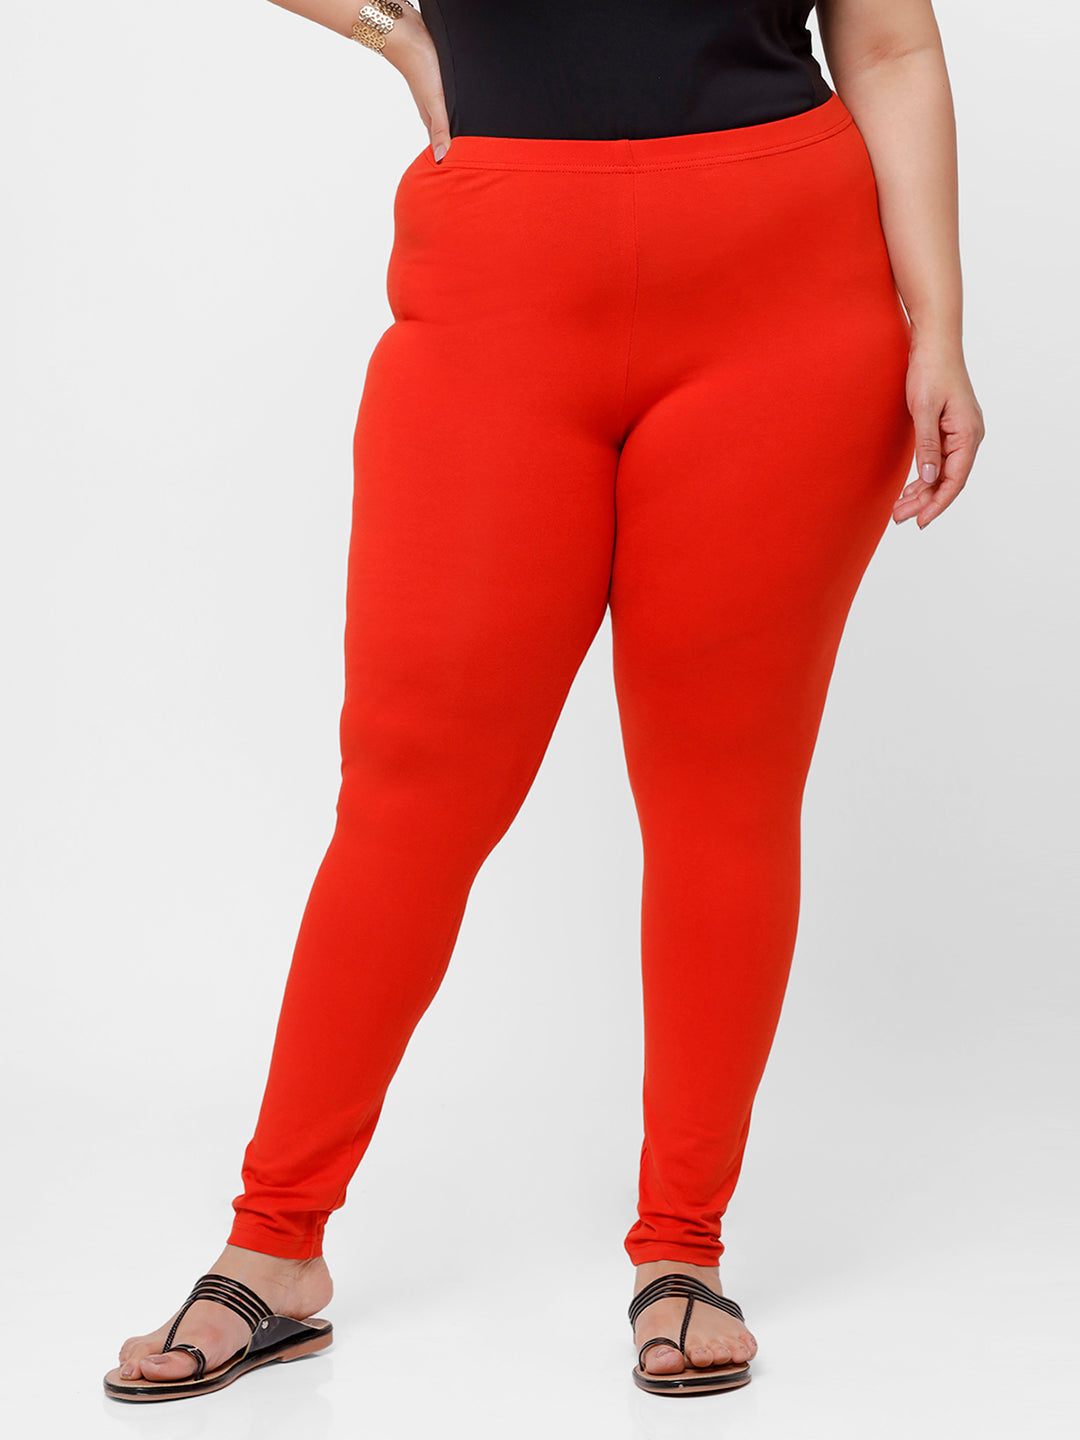 Buy Camey Women Ankle Length Cotton Lycra Legging Orange Online at Low  Prices in India - Paytmmall.com